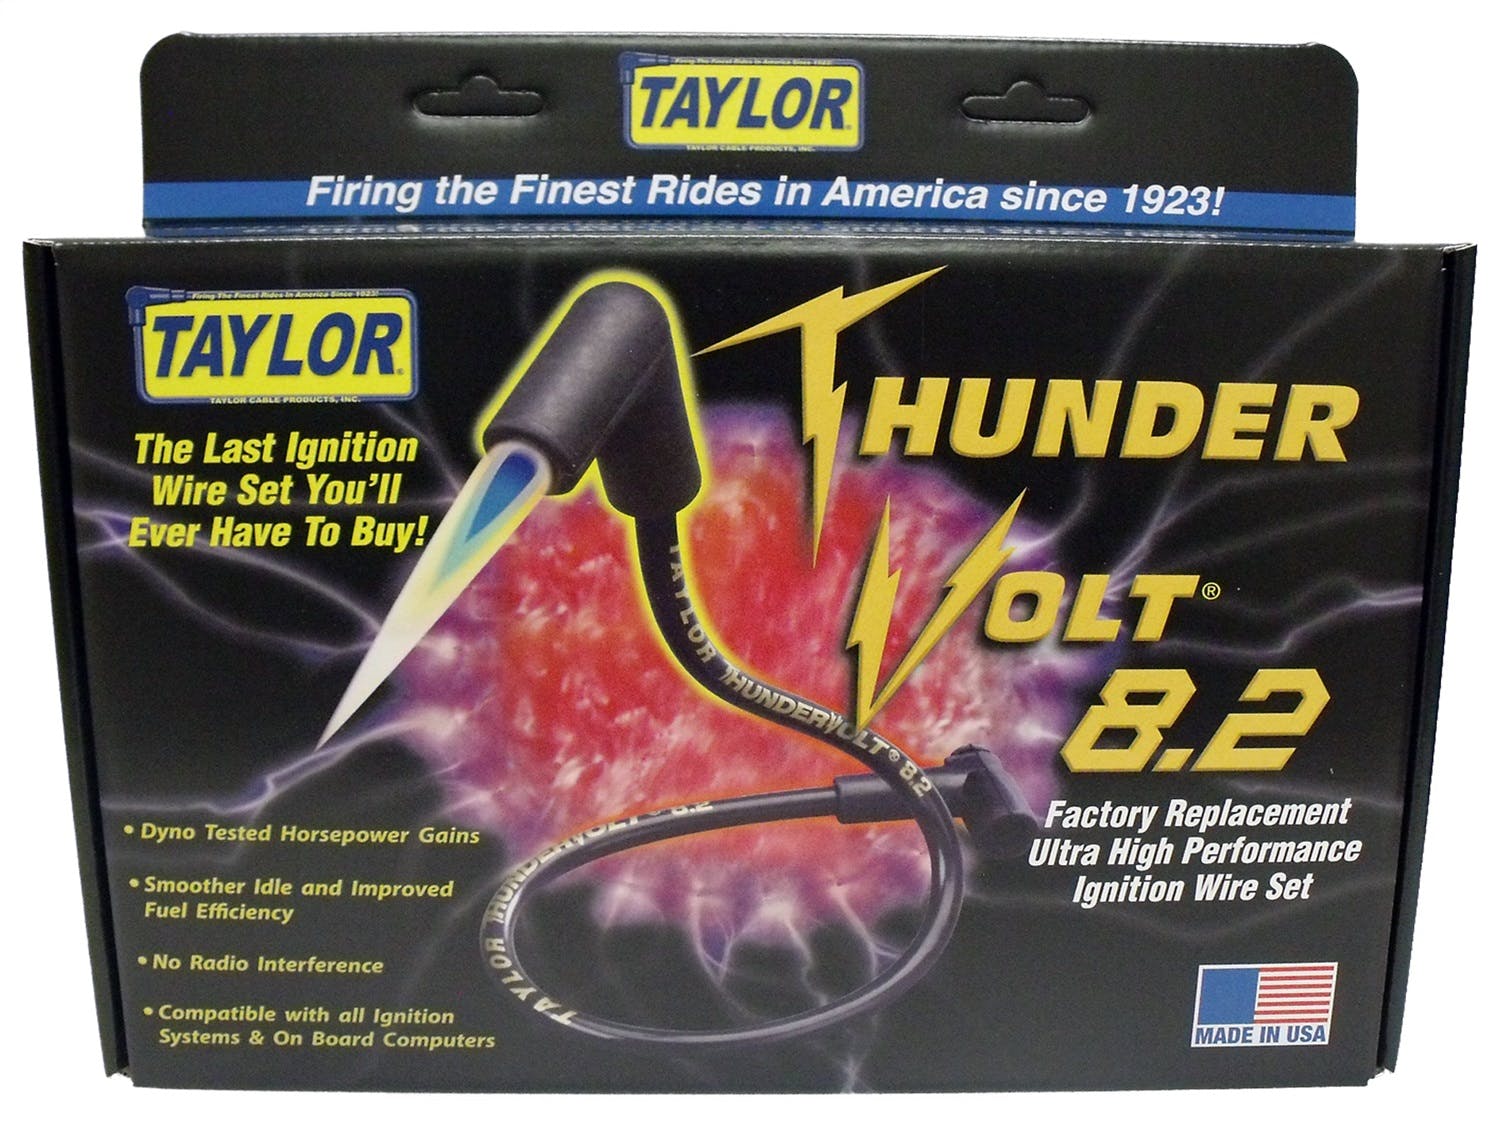 Taylor Cable Products 86230 Thundervolt 8.2 race fit 8 cyl red